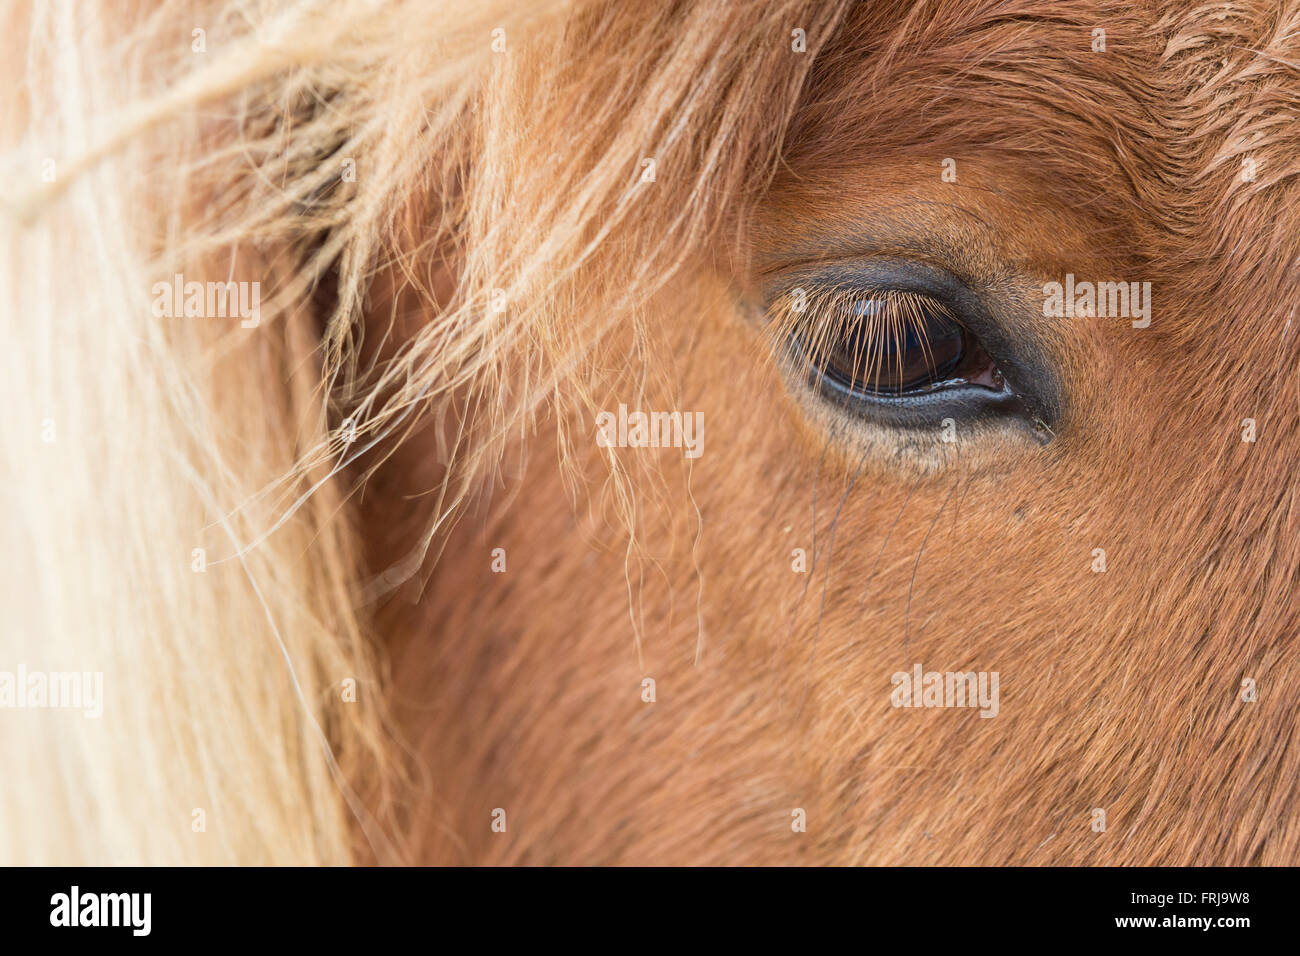 The Icelandic Horses are renowned for their long manes that usually covers their entire face. Sometimes the wind blows to reveal Stock Photo